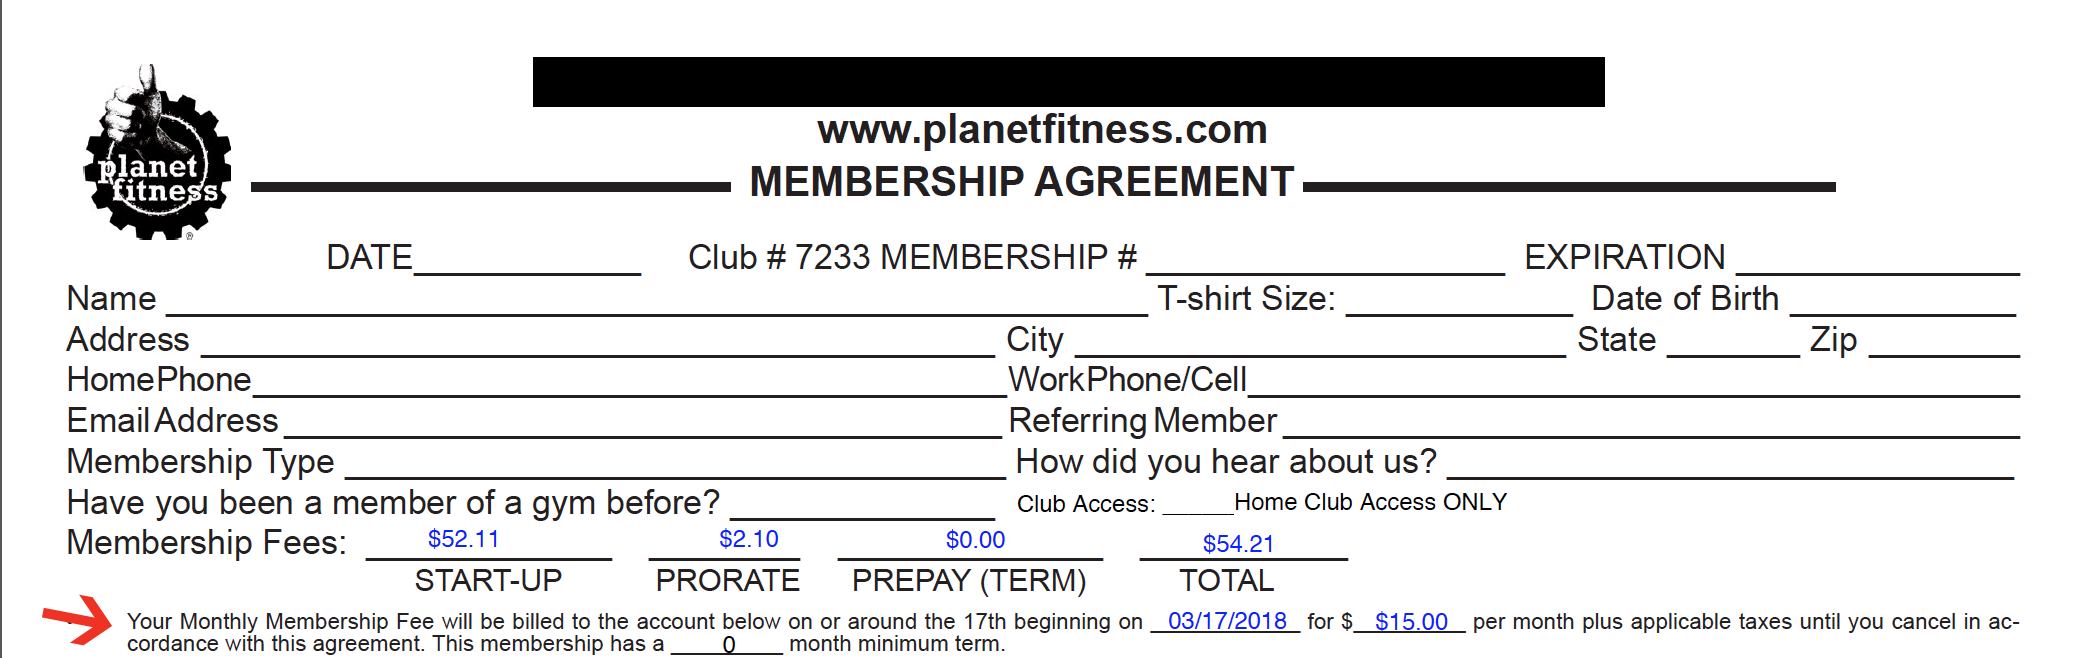 Best Planet fitness member contract pdf for Women